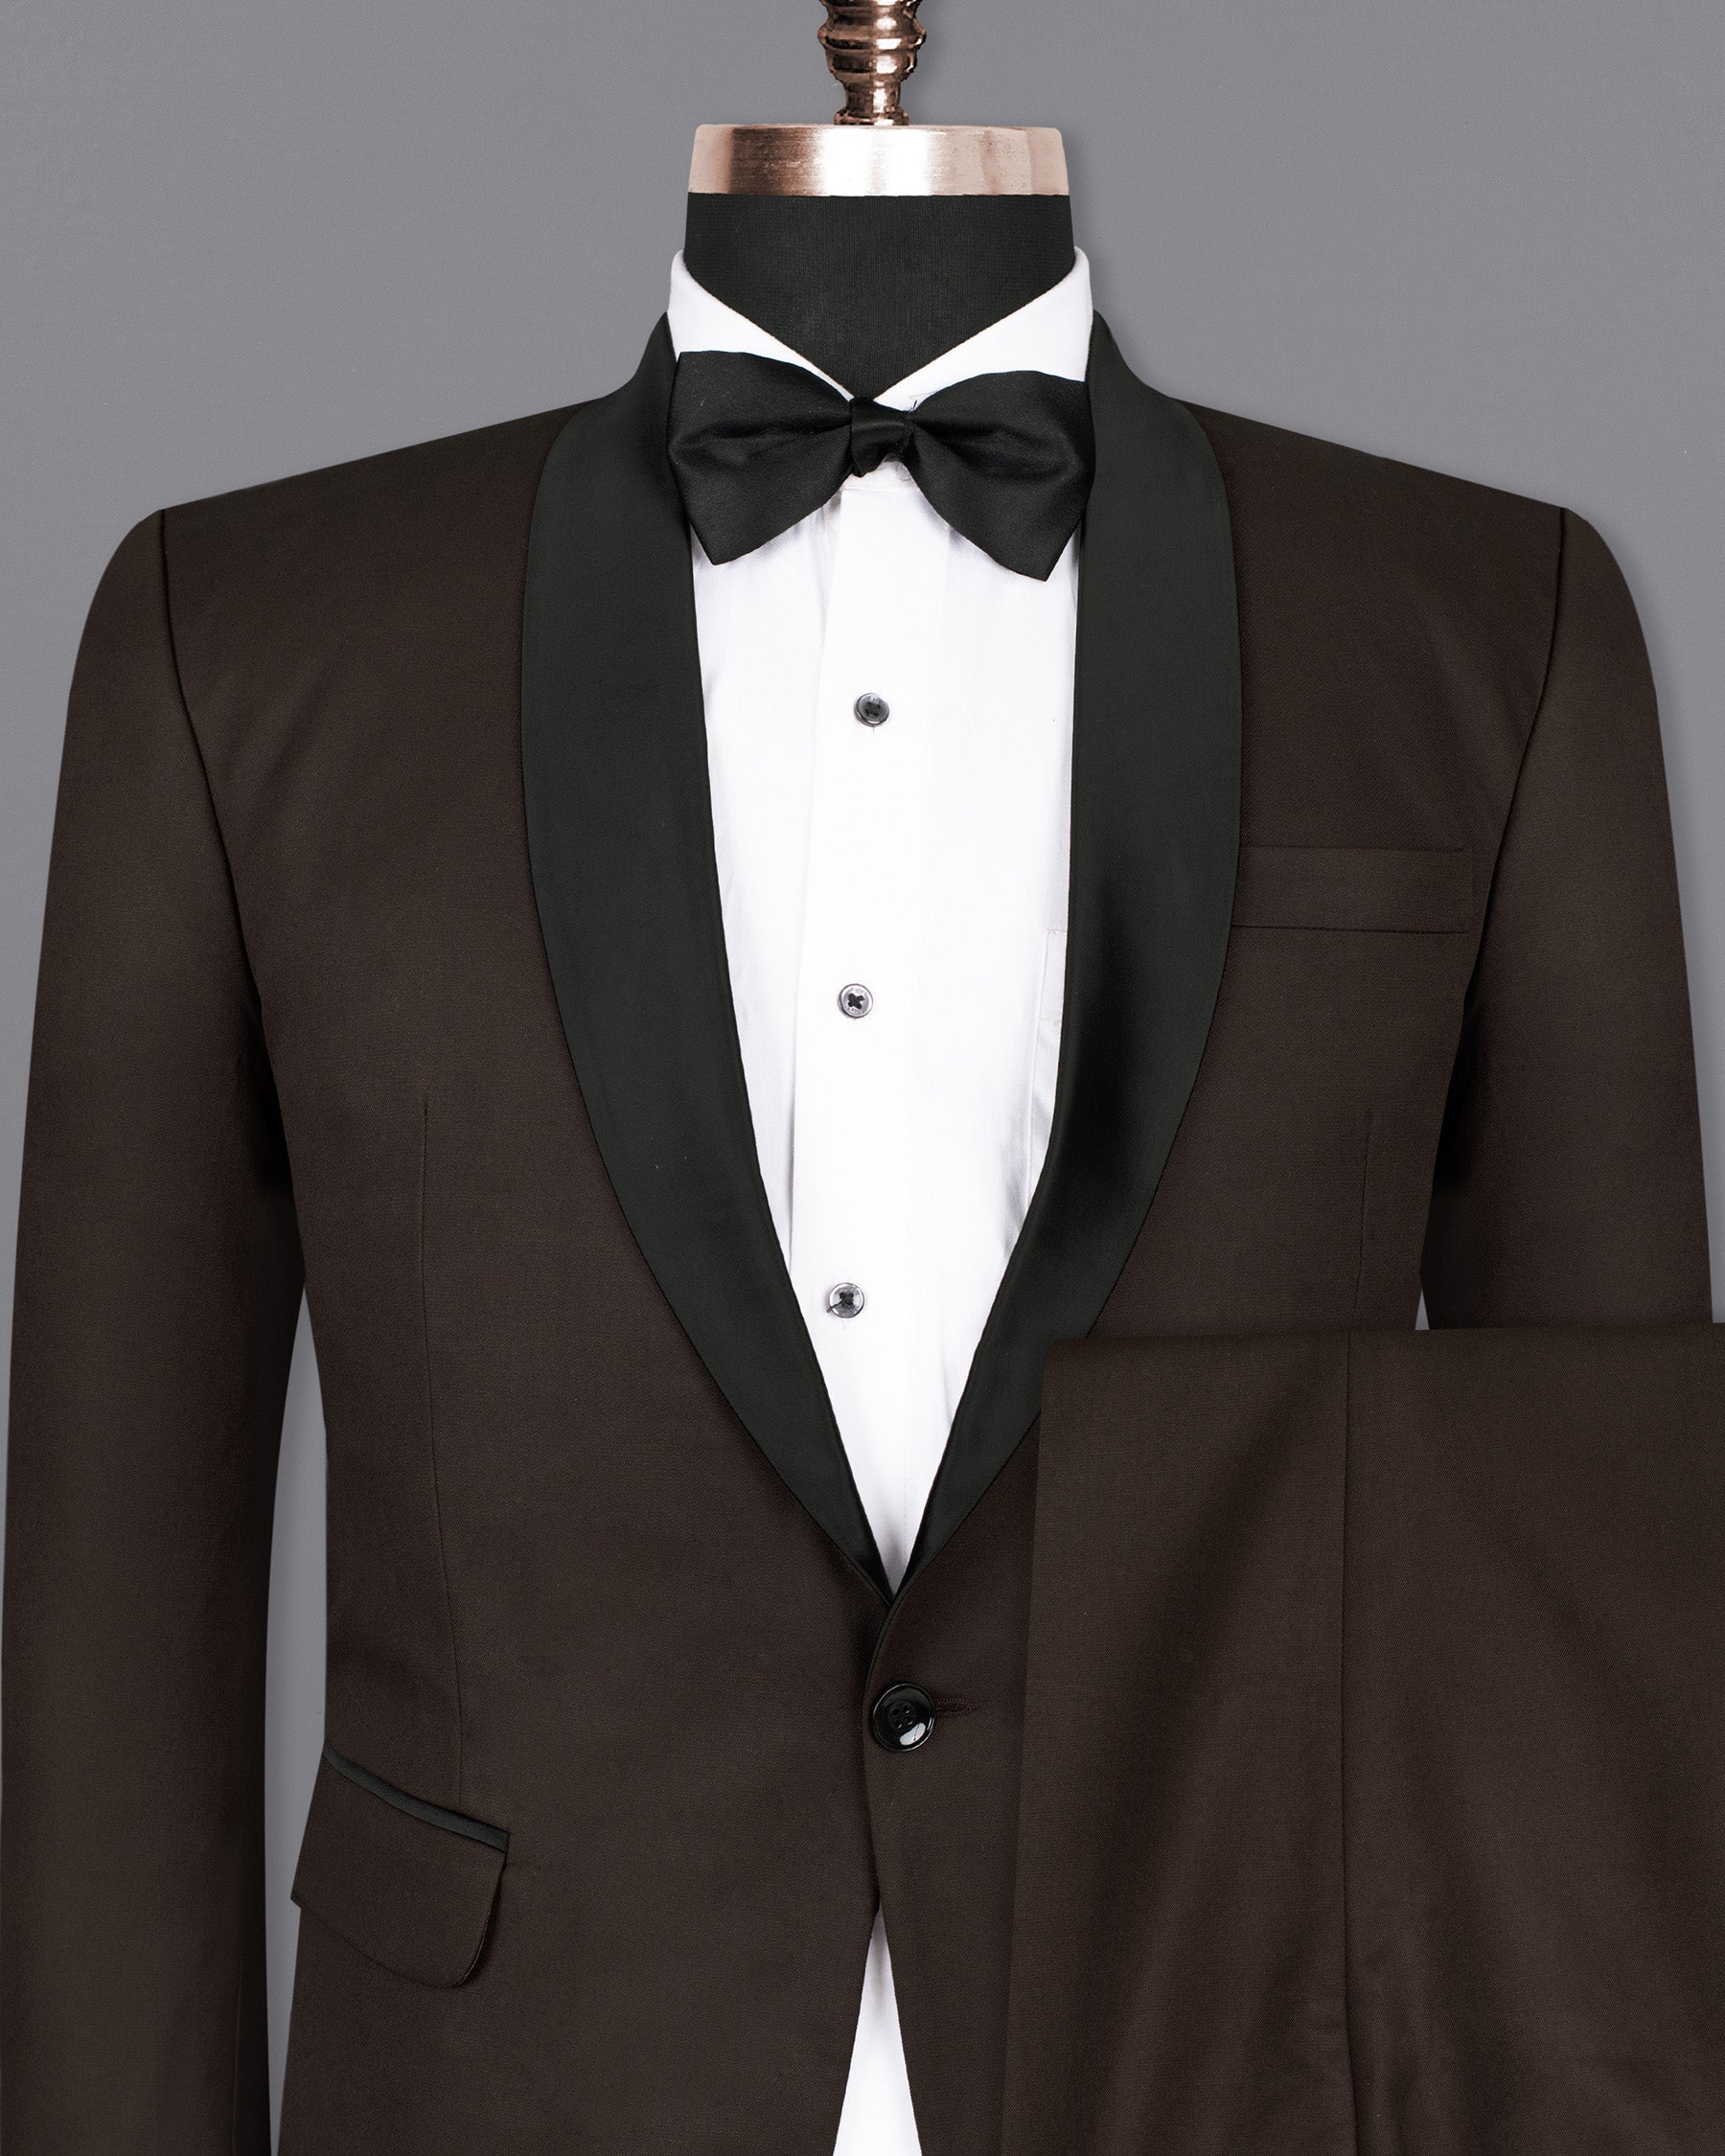 Cocoa Brown Wool Rich Tuxedo Suit ST1346-BKL-36, ST1346-BKL-38, ST1346-BKL-40, ST1346-BKL-42, ST1346-BKL-44, ST1346-BKL-46, ST1346-BKL-48, ST1346-BKL-50, ST1346-BKL-52, ST1346-BKL-54, ST1346-BKL-56, ST1346-BKL-58, ST1346-BKL-60